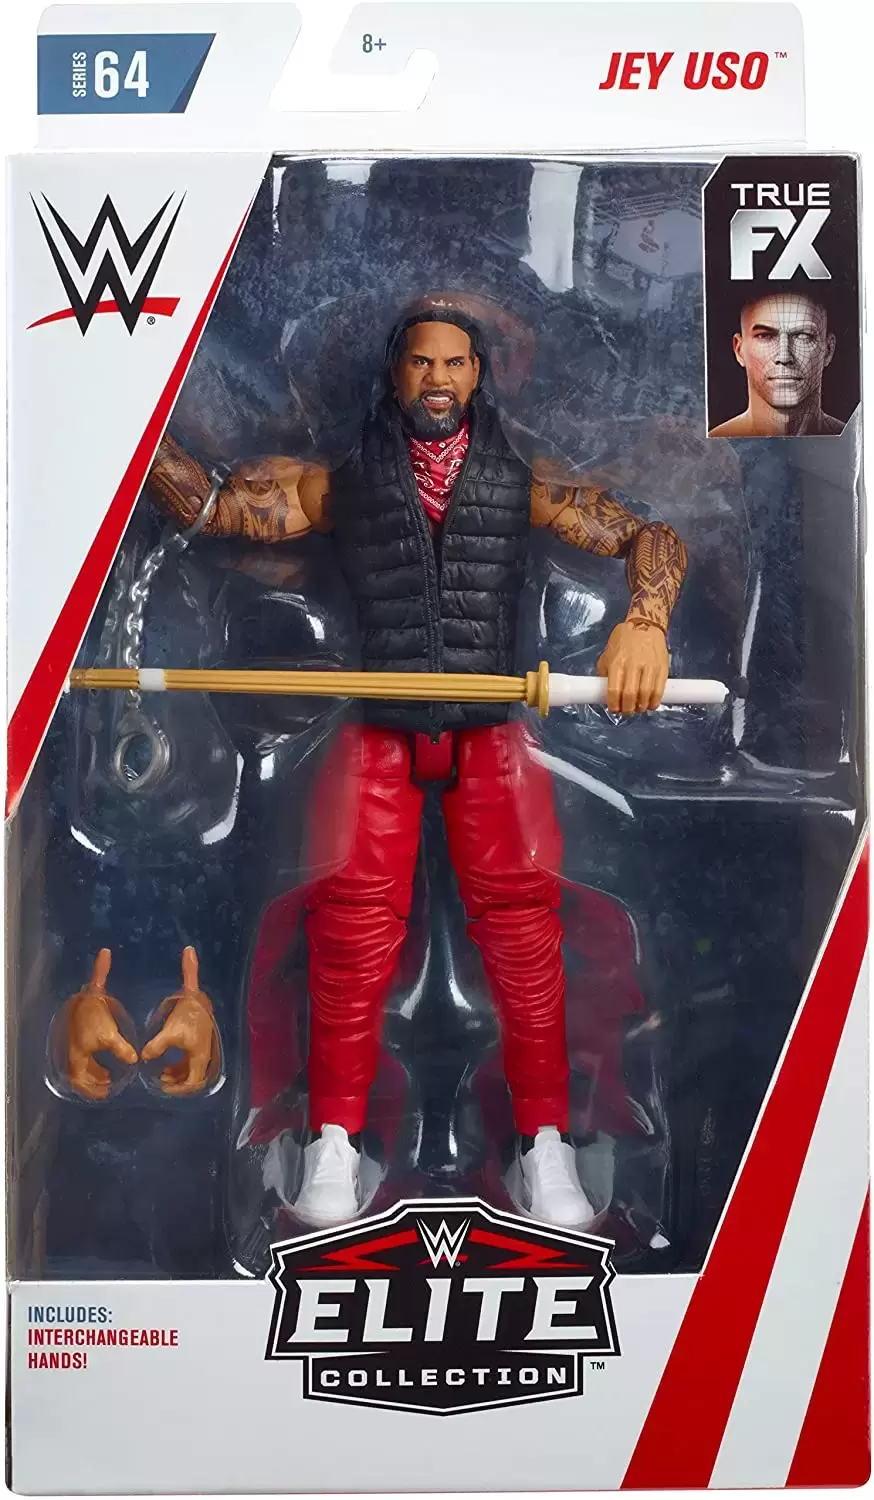 WWE Elite Collection - Jey Uso